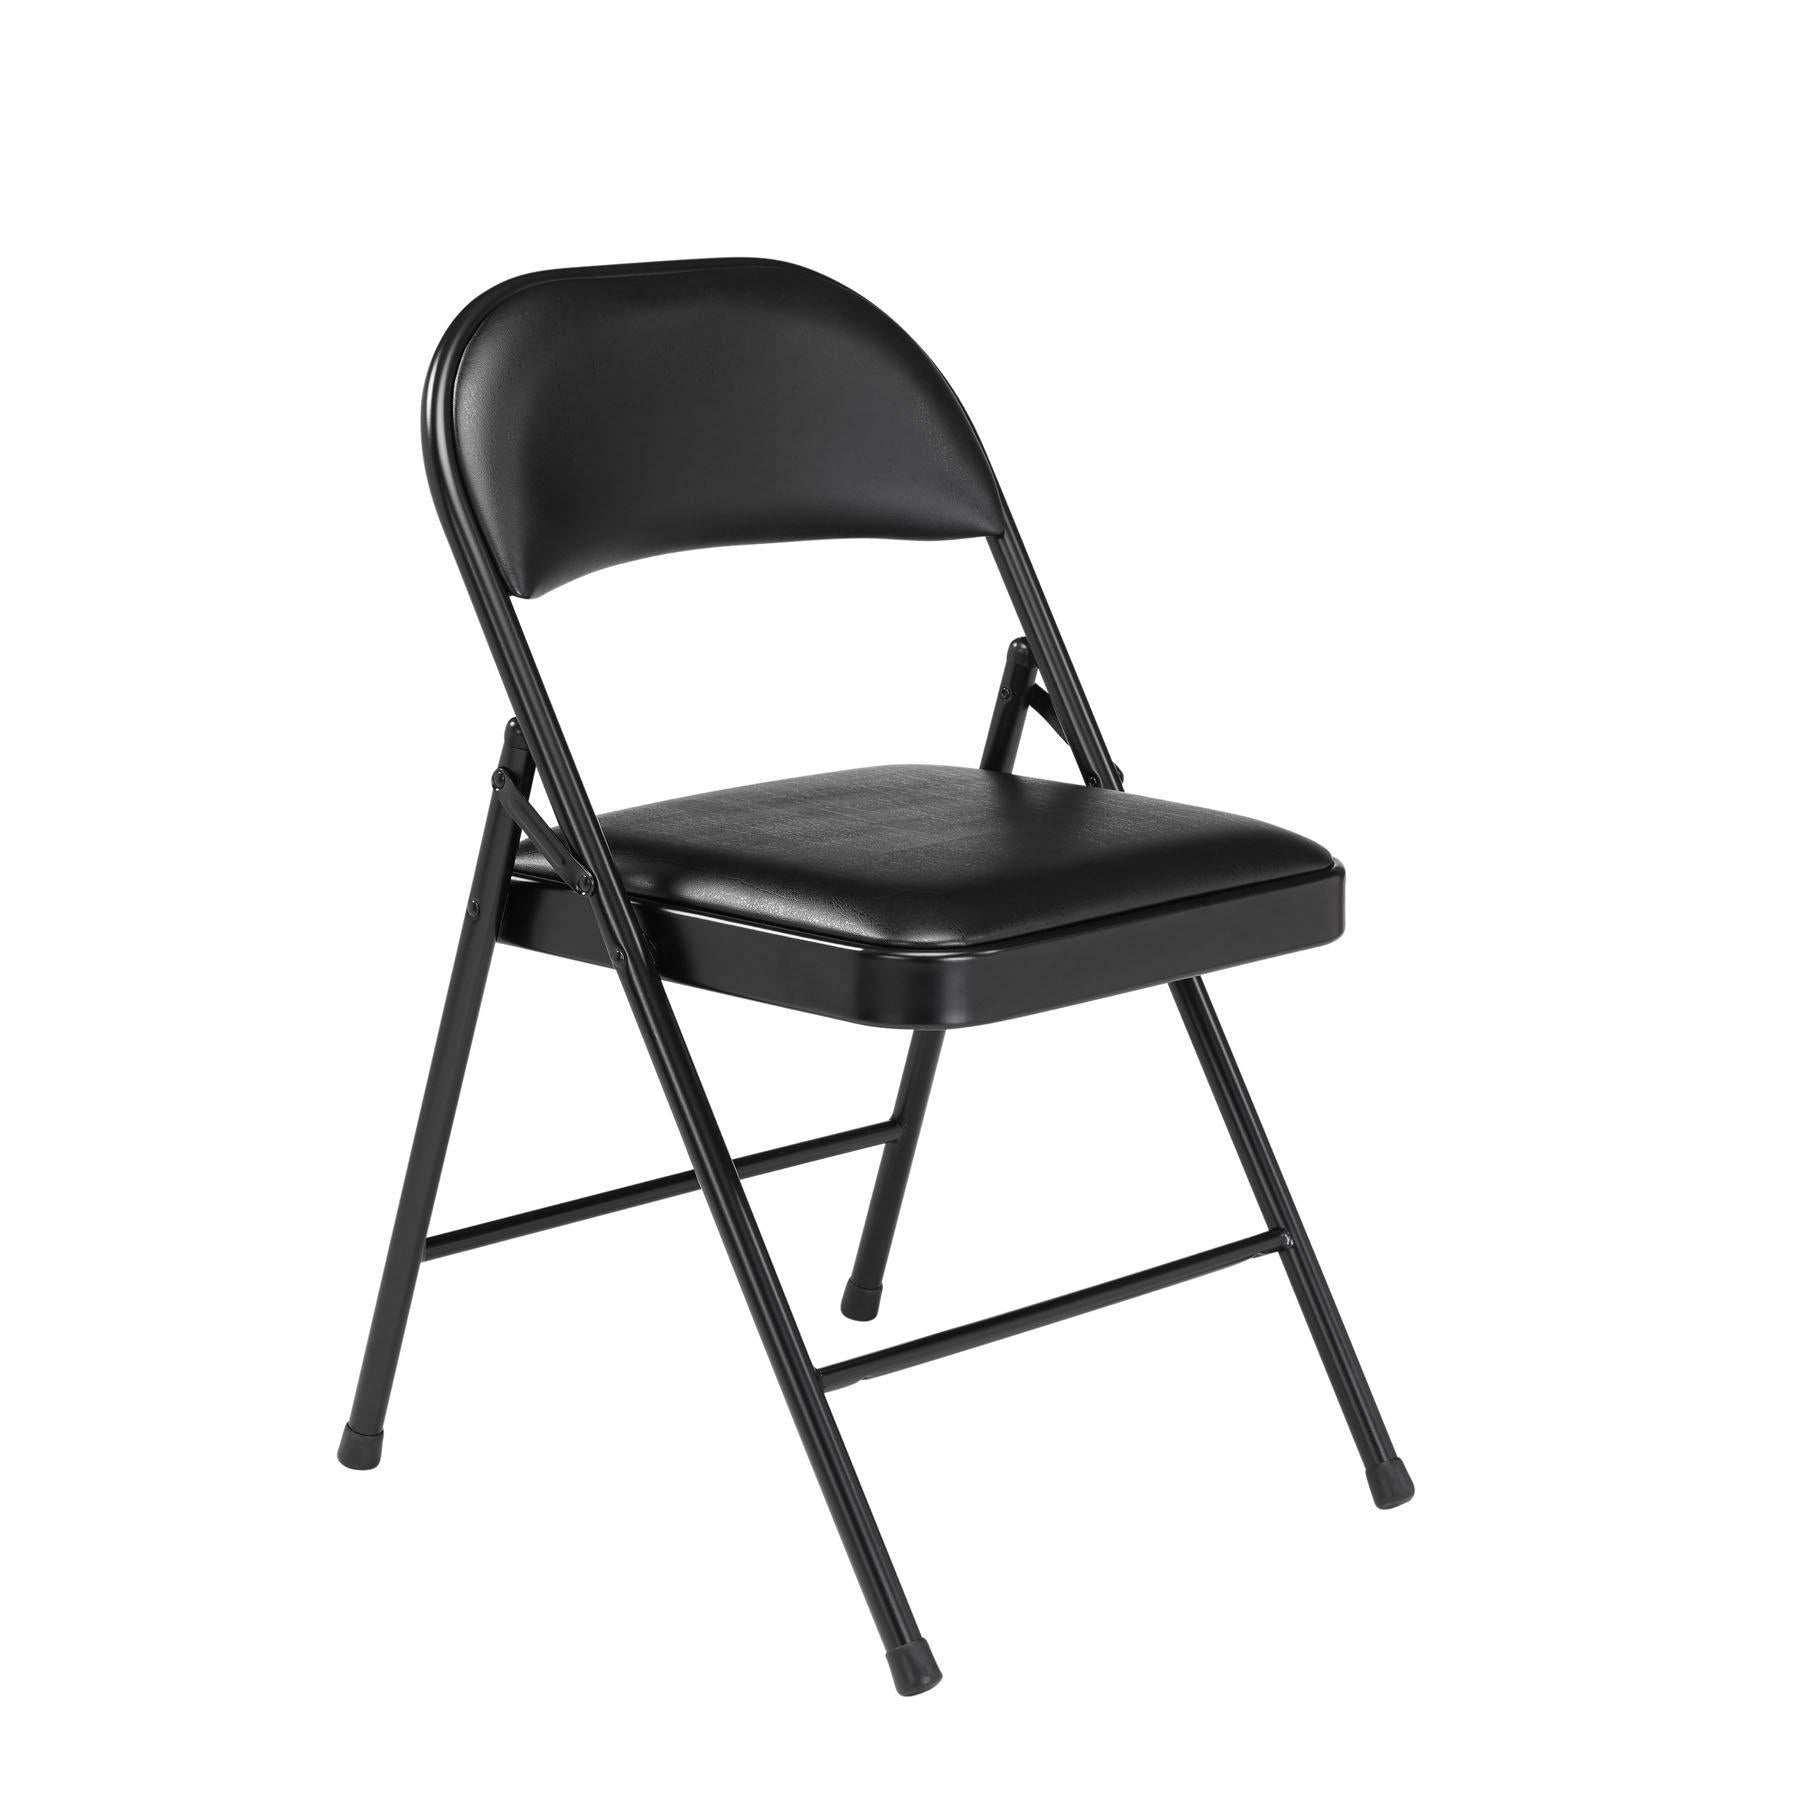 Commercialine Vinyl Padded Steel Folding Chair (Carton of 4)-Chairs-Black-